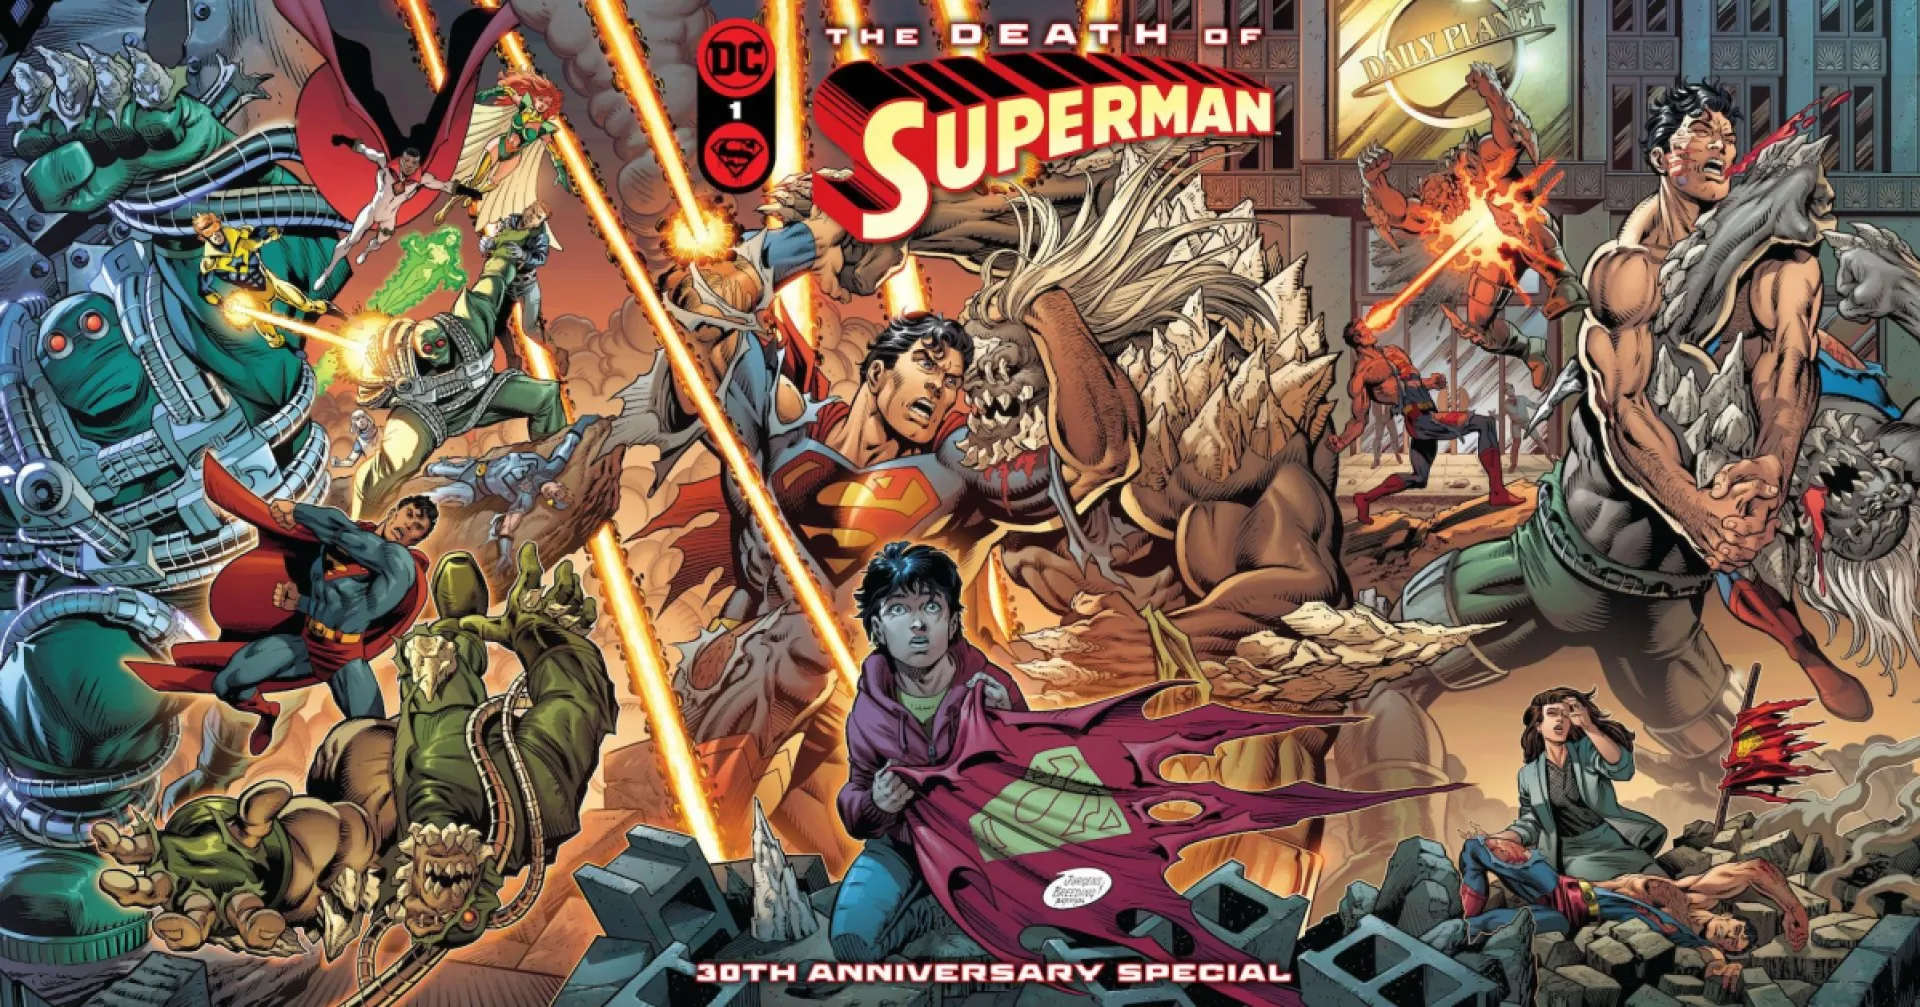 The Death of Superman 30th Anniversary Special #1